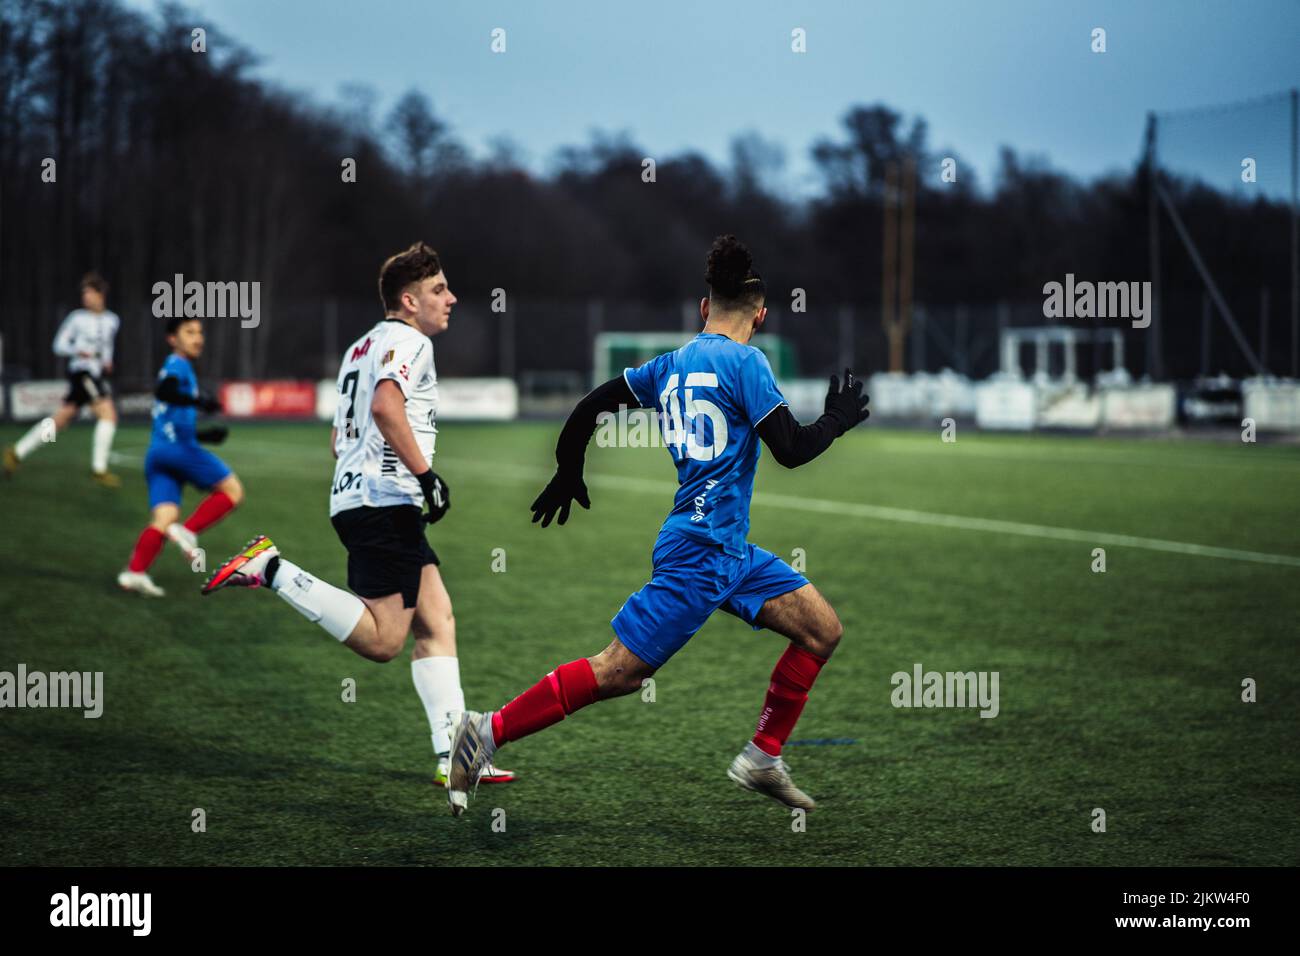 The Young footballers playing the match Karlslund vs Orebro in 2022 Stock Photo